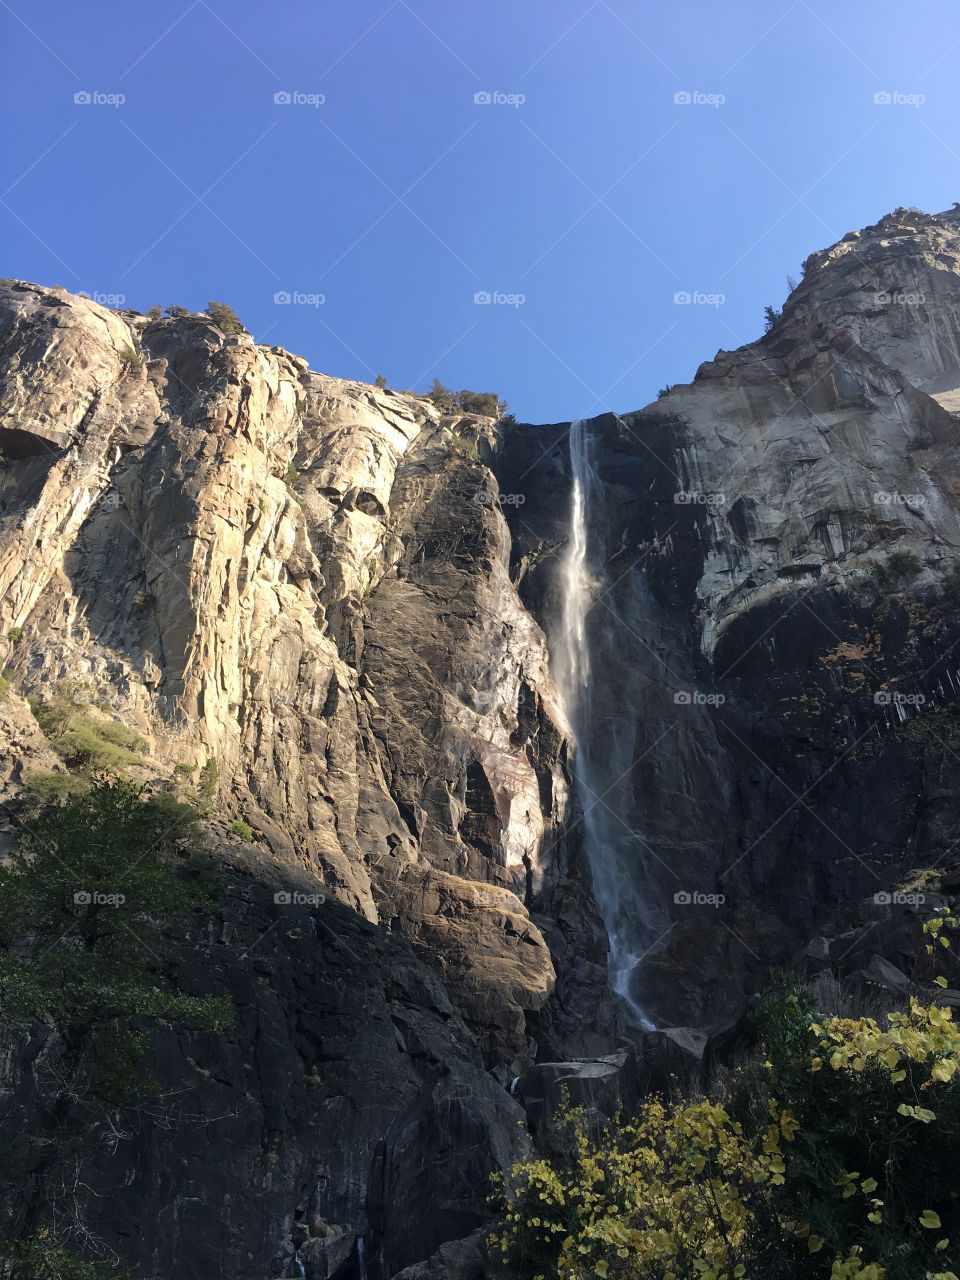 A view of Bridal Veil Falls on a clear blue sky day where there are no clouds persons or obstructions of the view from the bottom of the falls. 